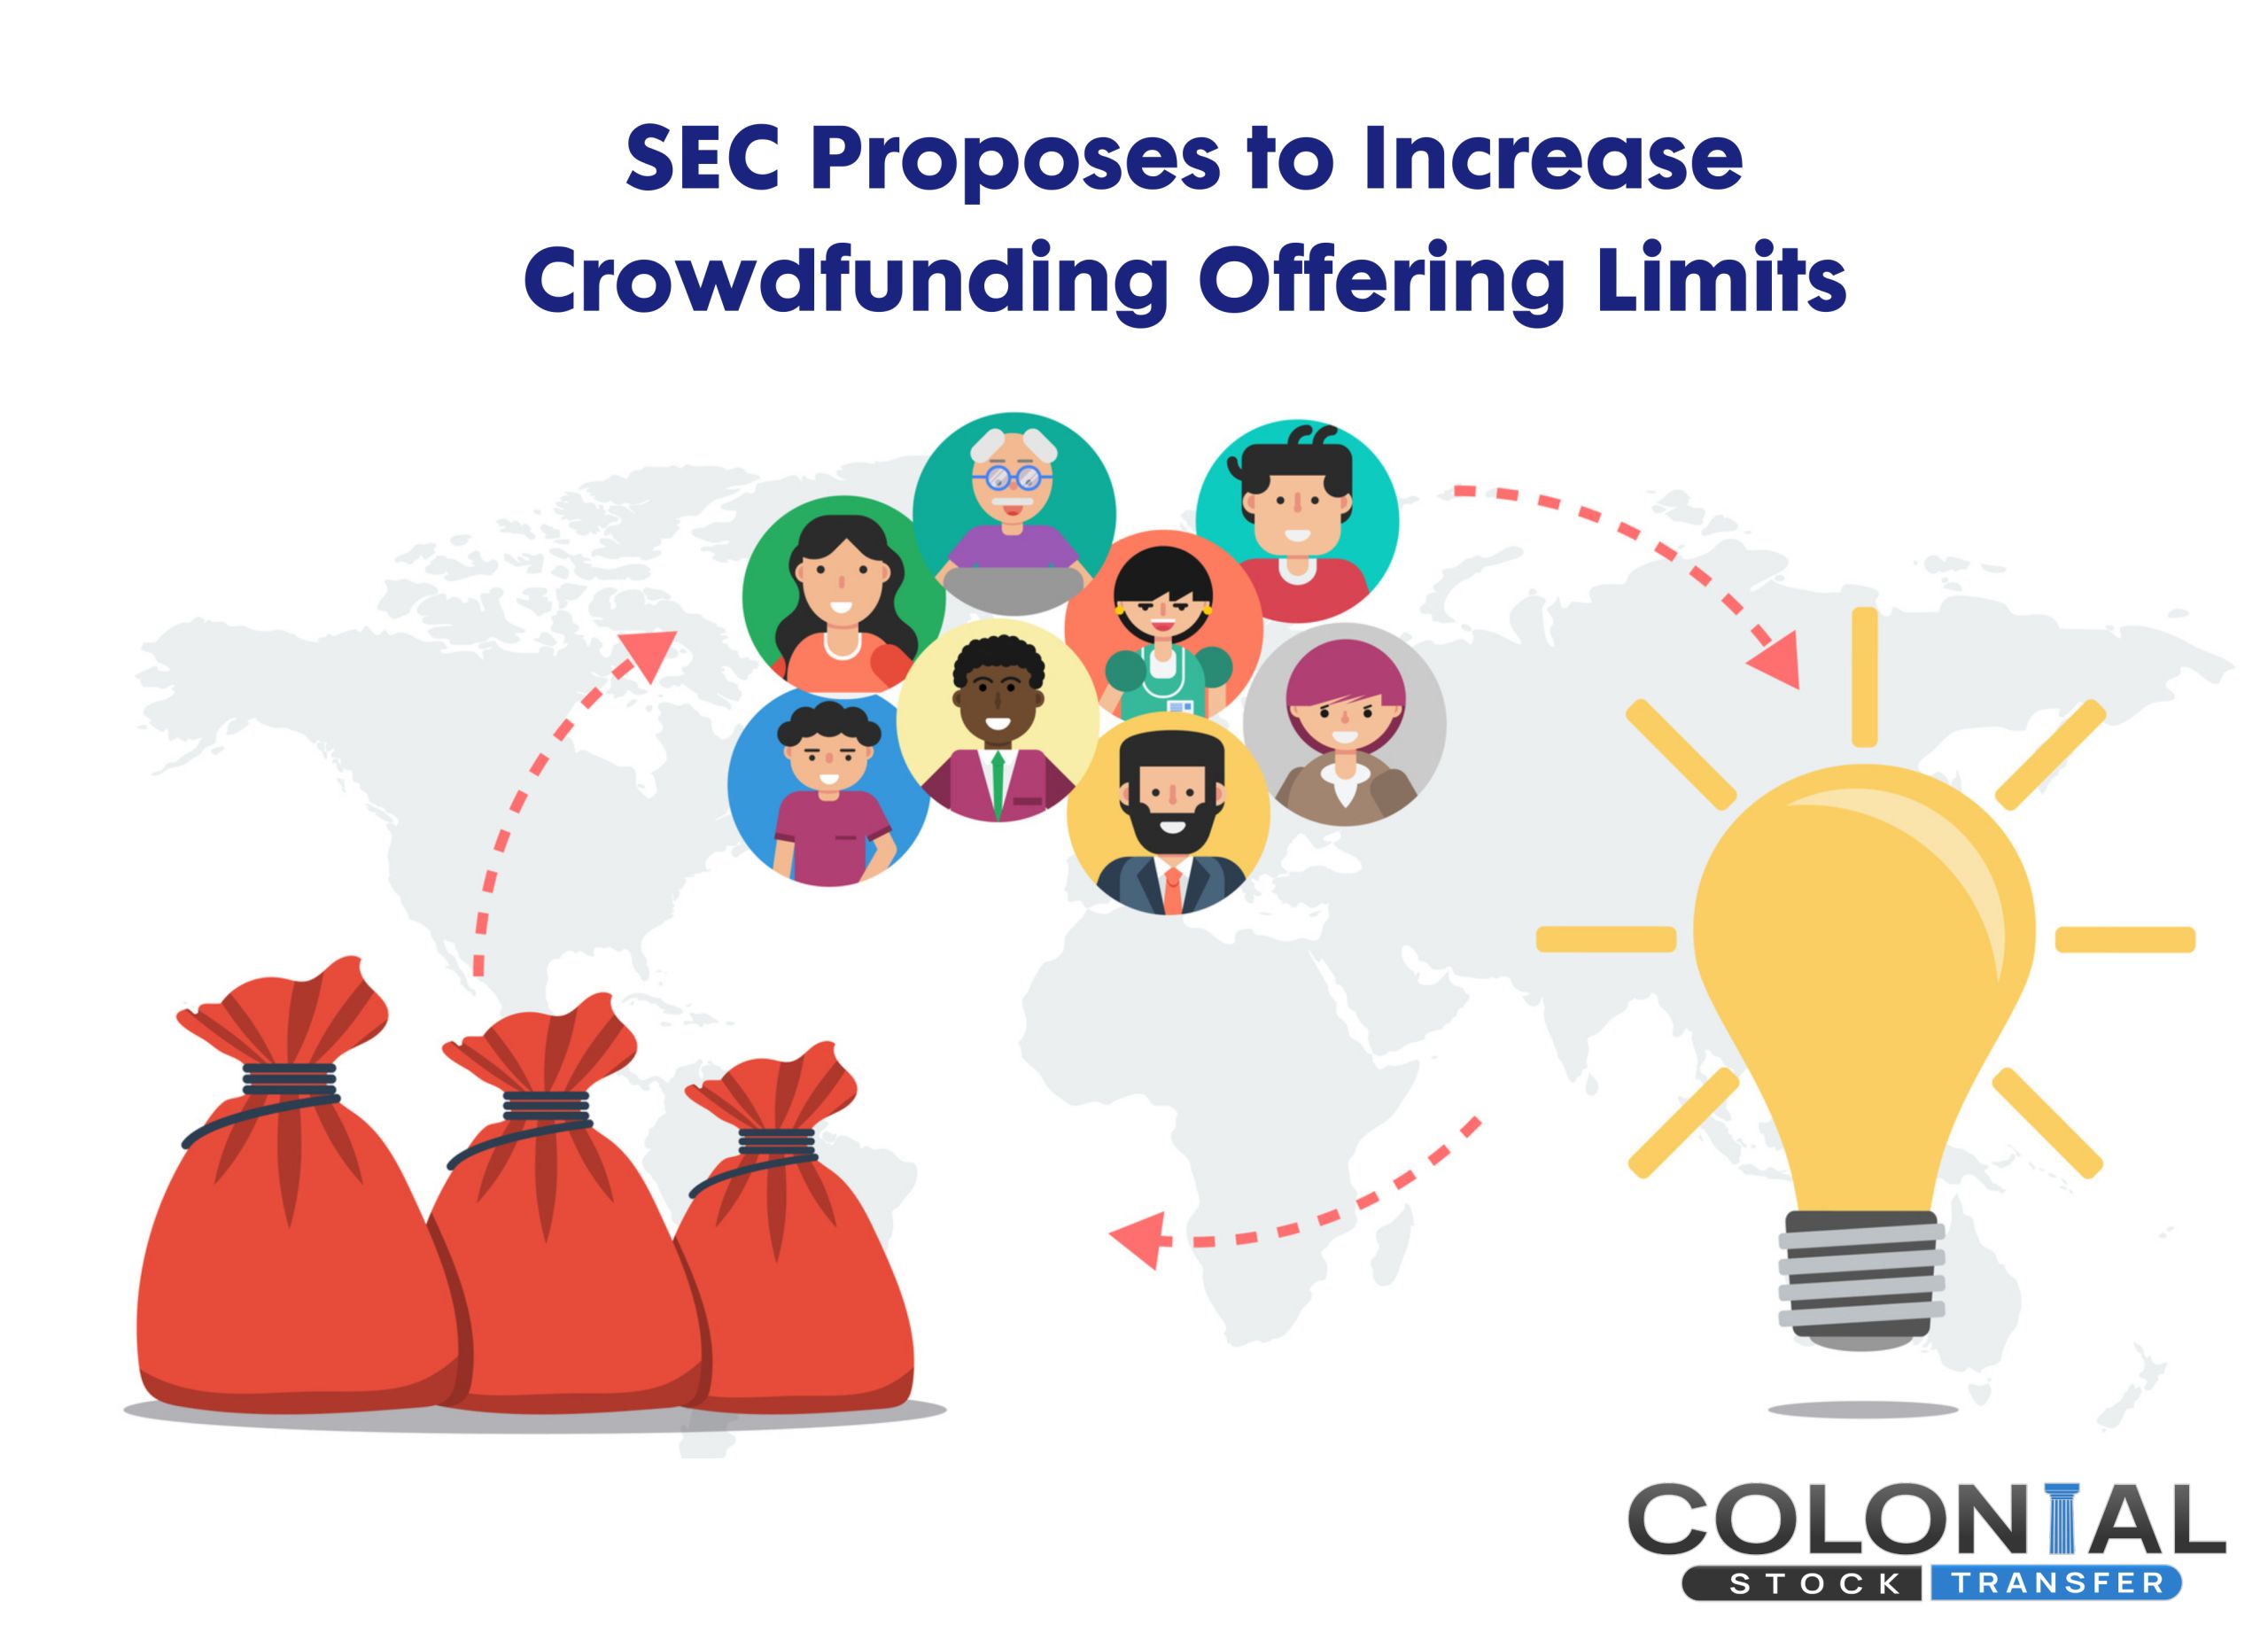 SEC Proposes to Increase Crowdfunding Offering Limits